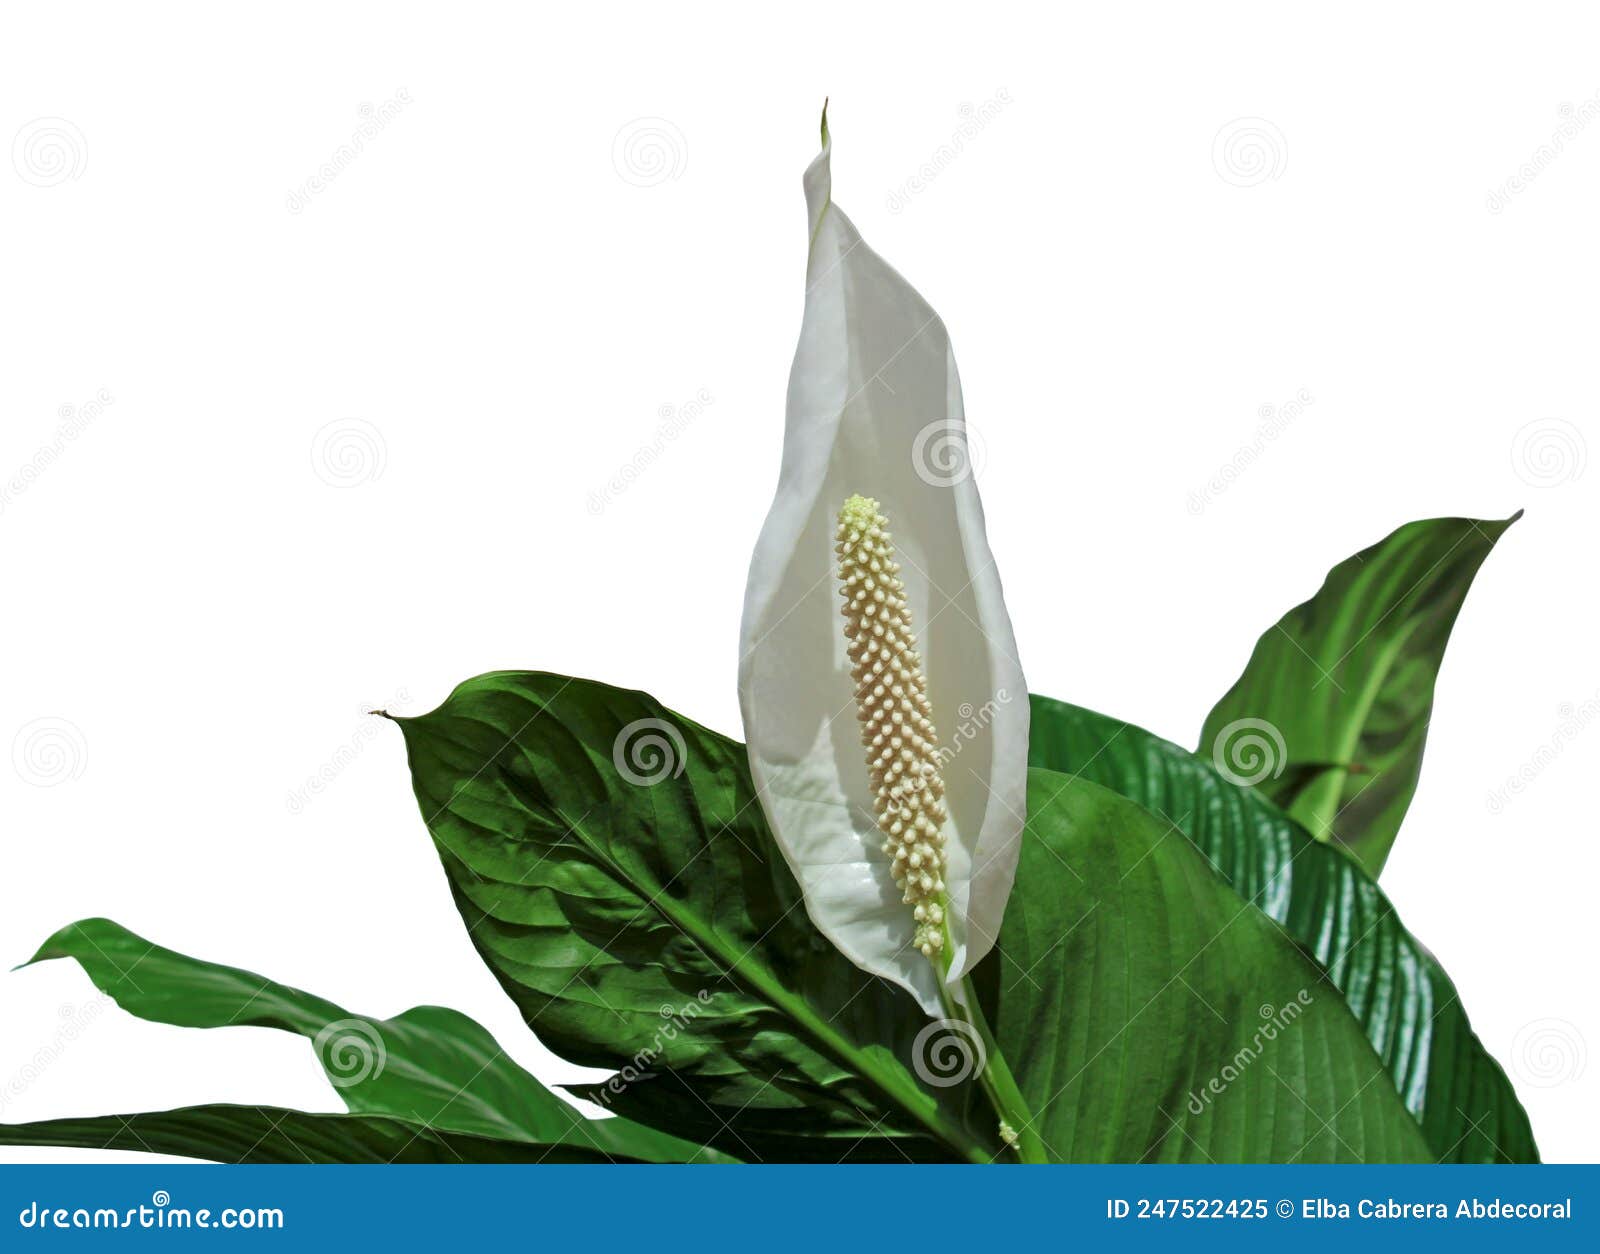 spathiphyllum flower also known as mauna loa plant, peace lily, spathe flower, white flag, white sail